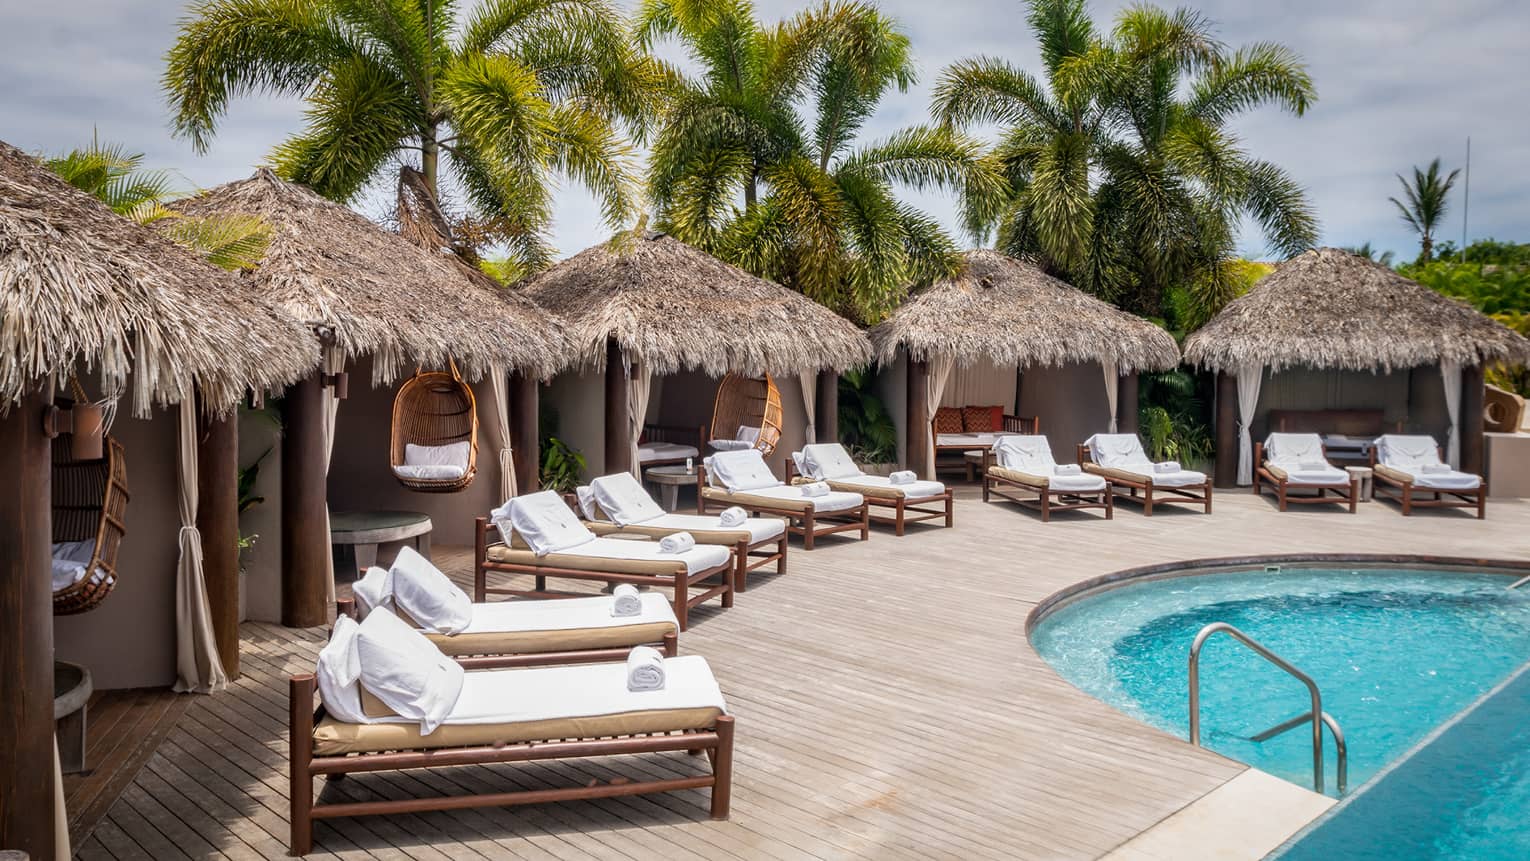 Grass-topped poolside cabanas with row of lounge chairs in front, palm trees in distance